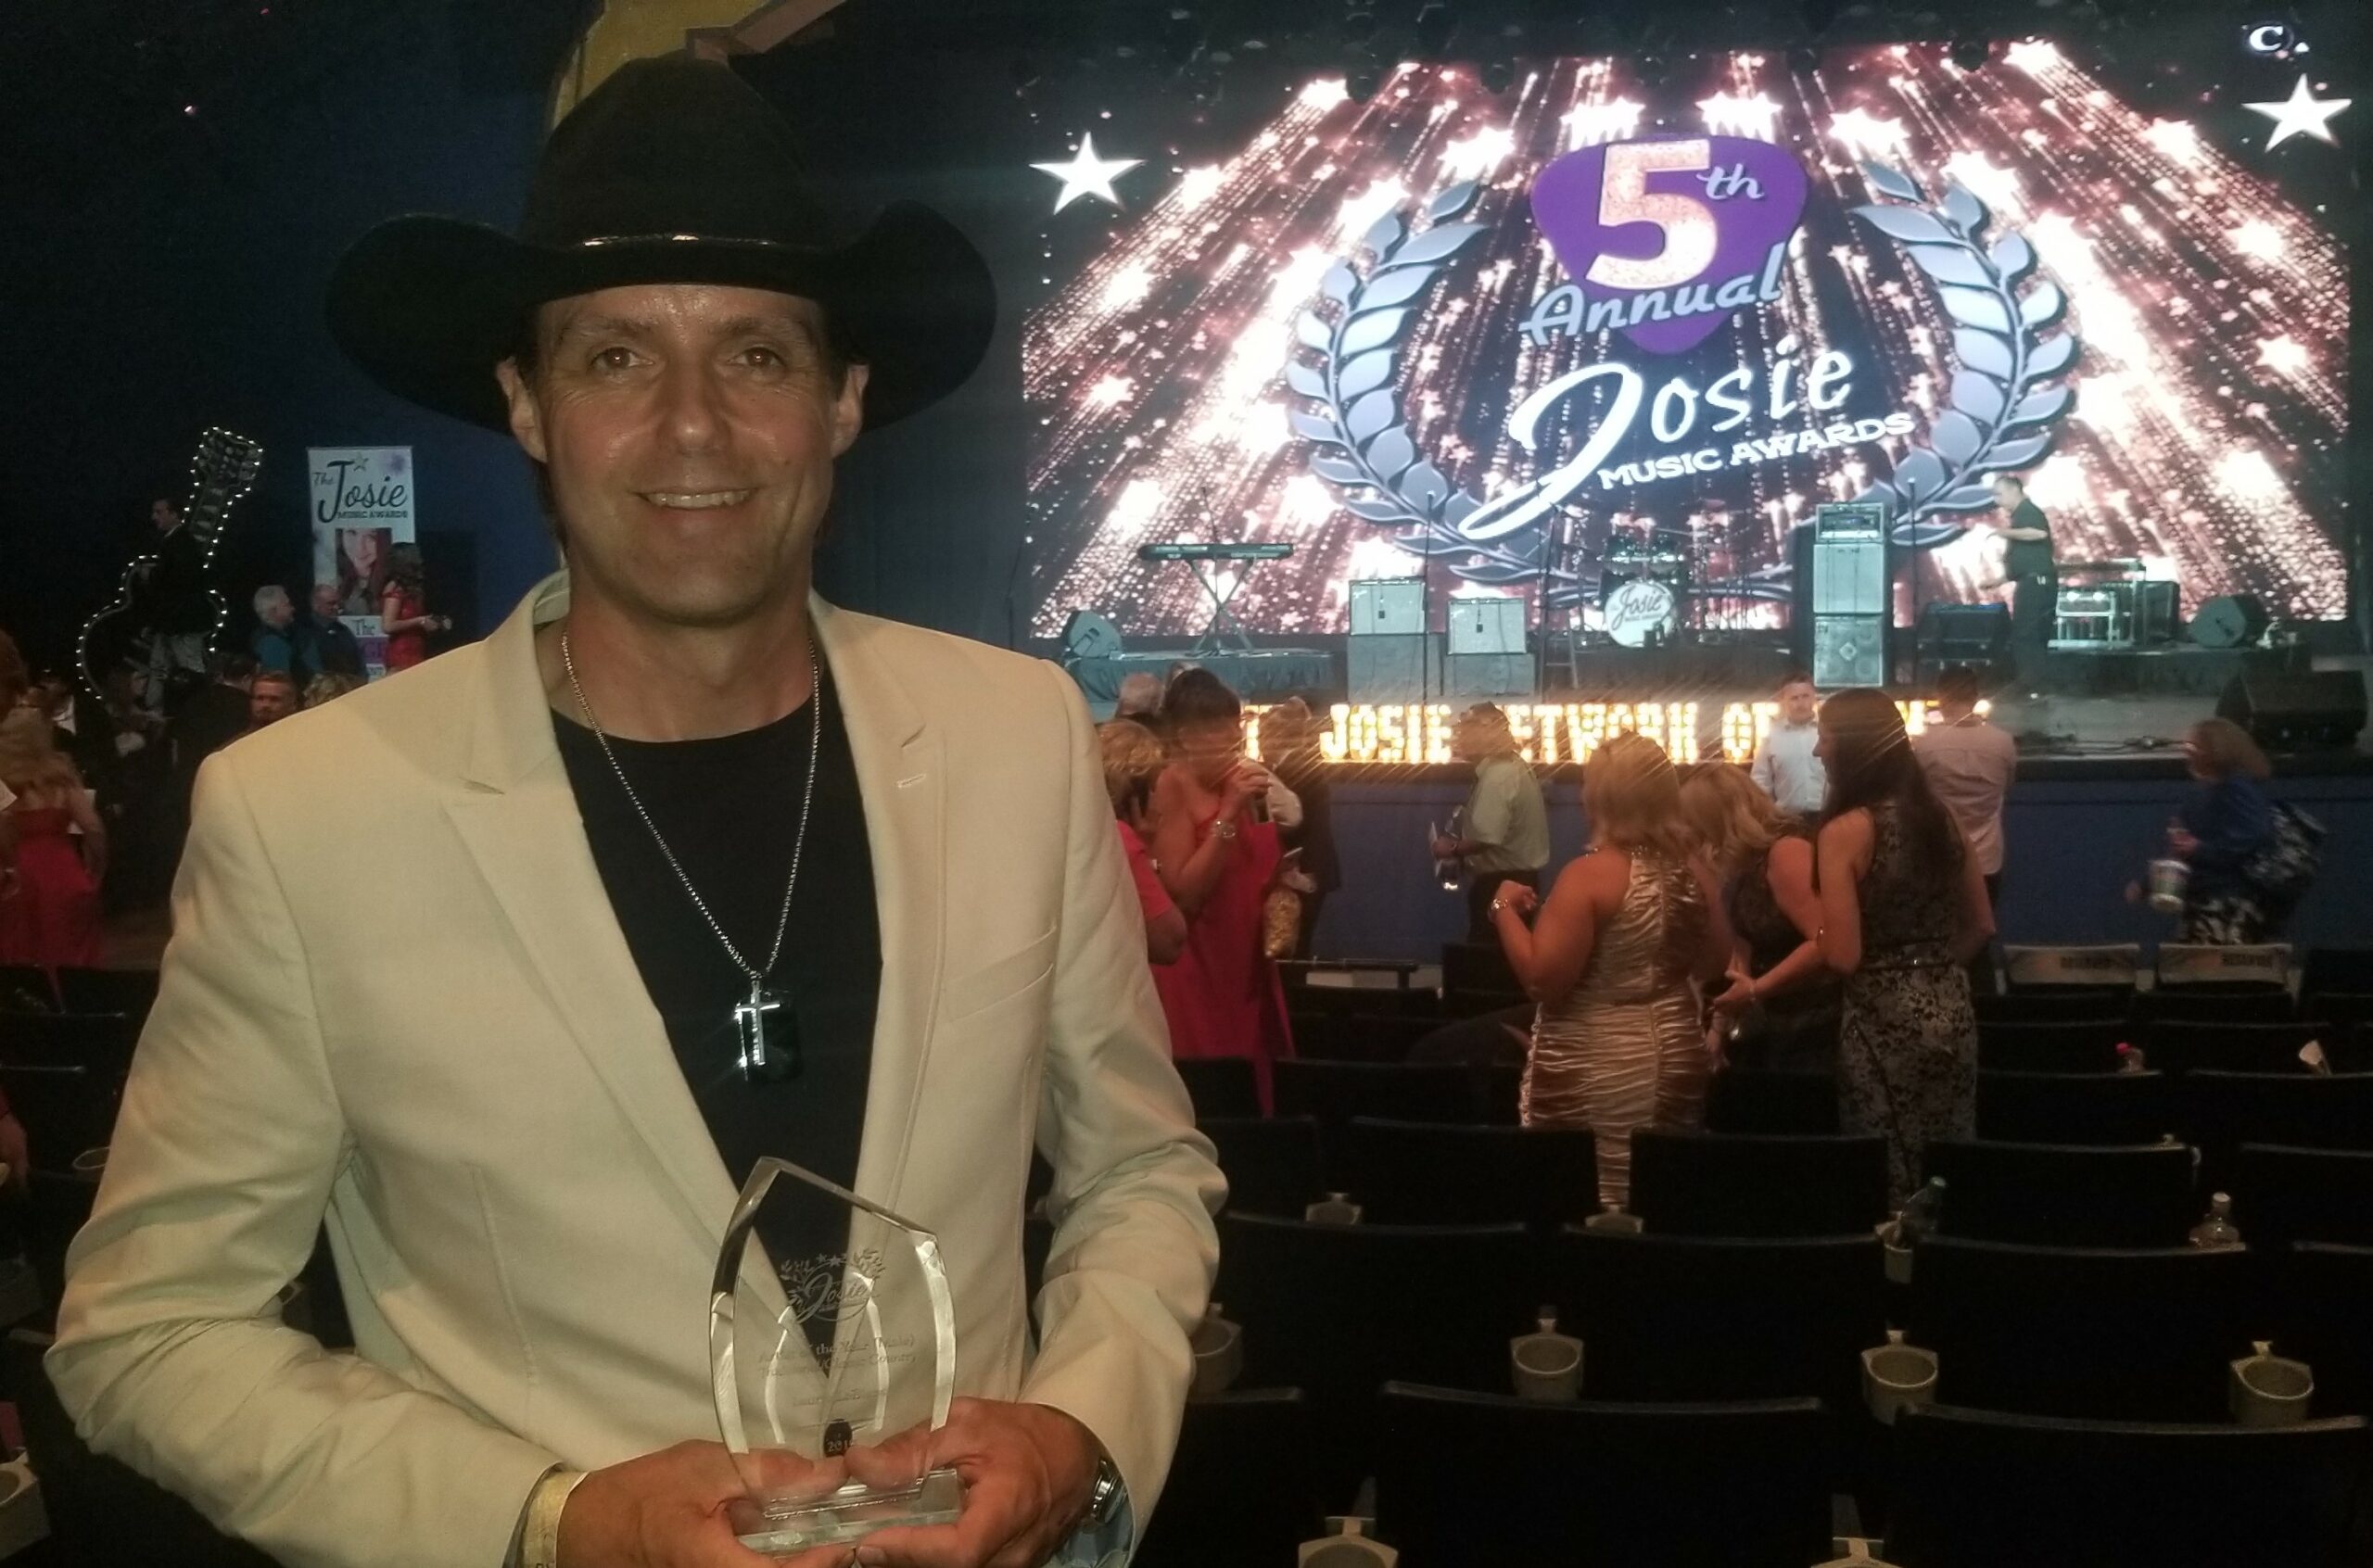 Laurie LeBlanc "Male Country Artist of the Year" au Josie Music Awards au Tennessee